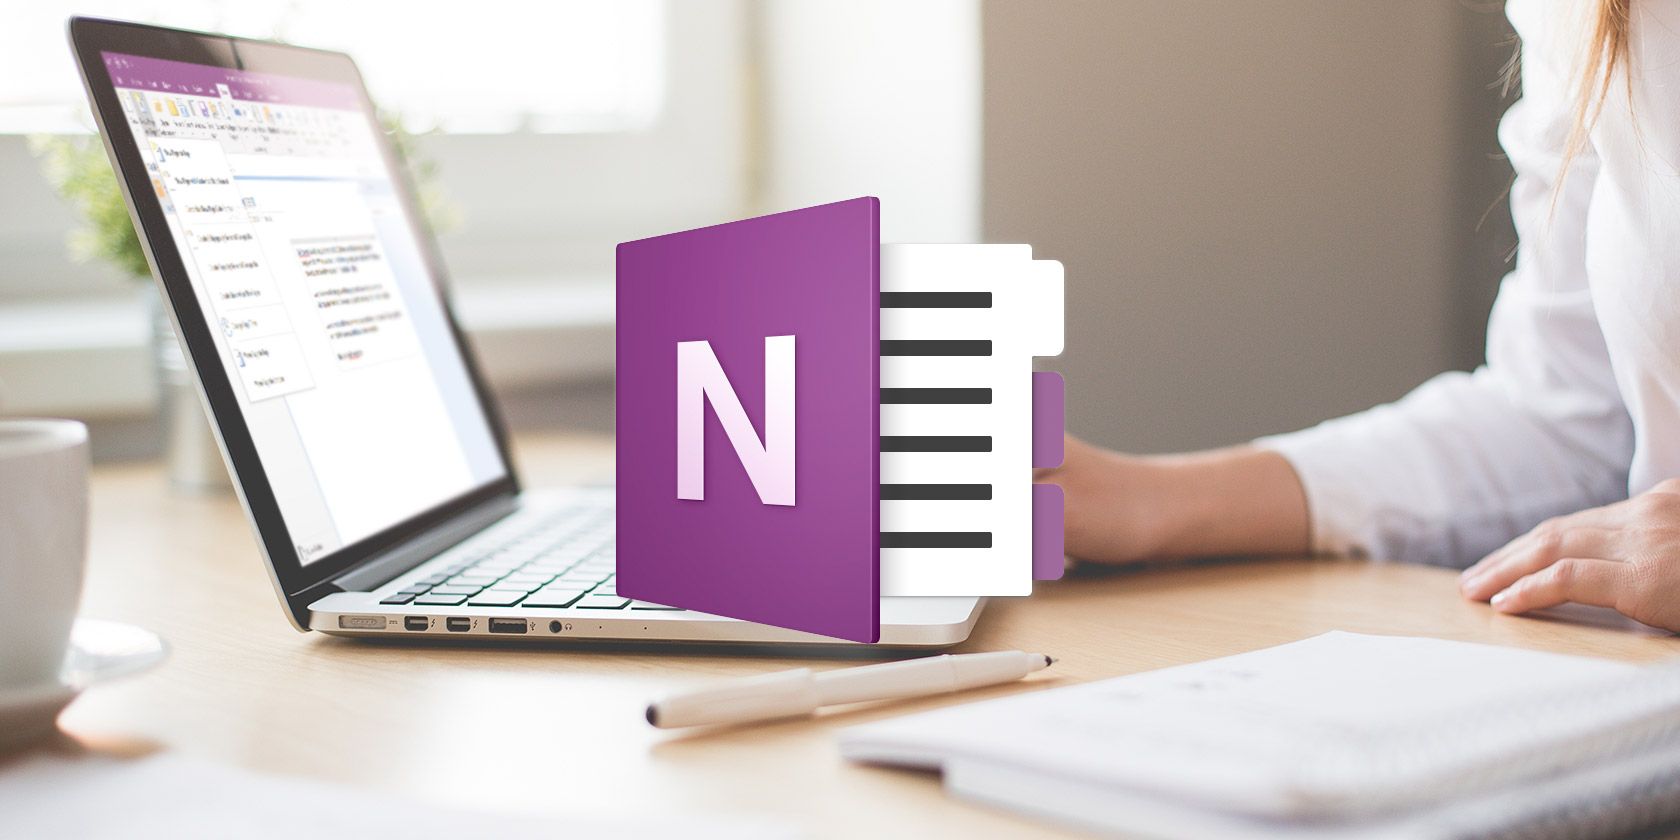 microsoft onenote for mac compatability with windows